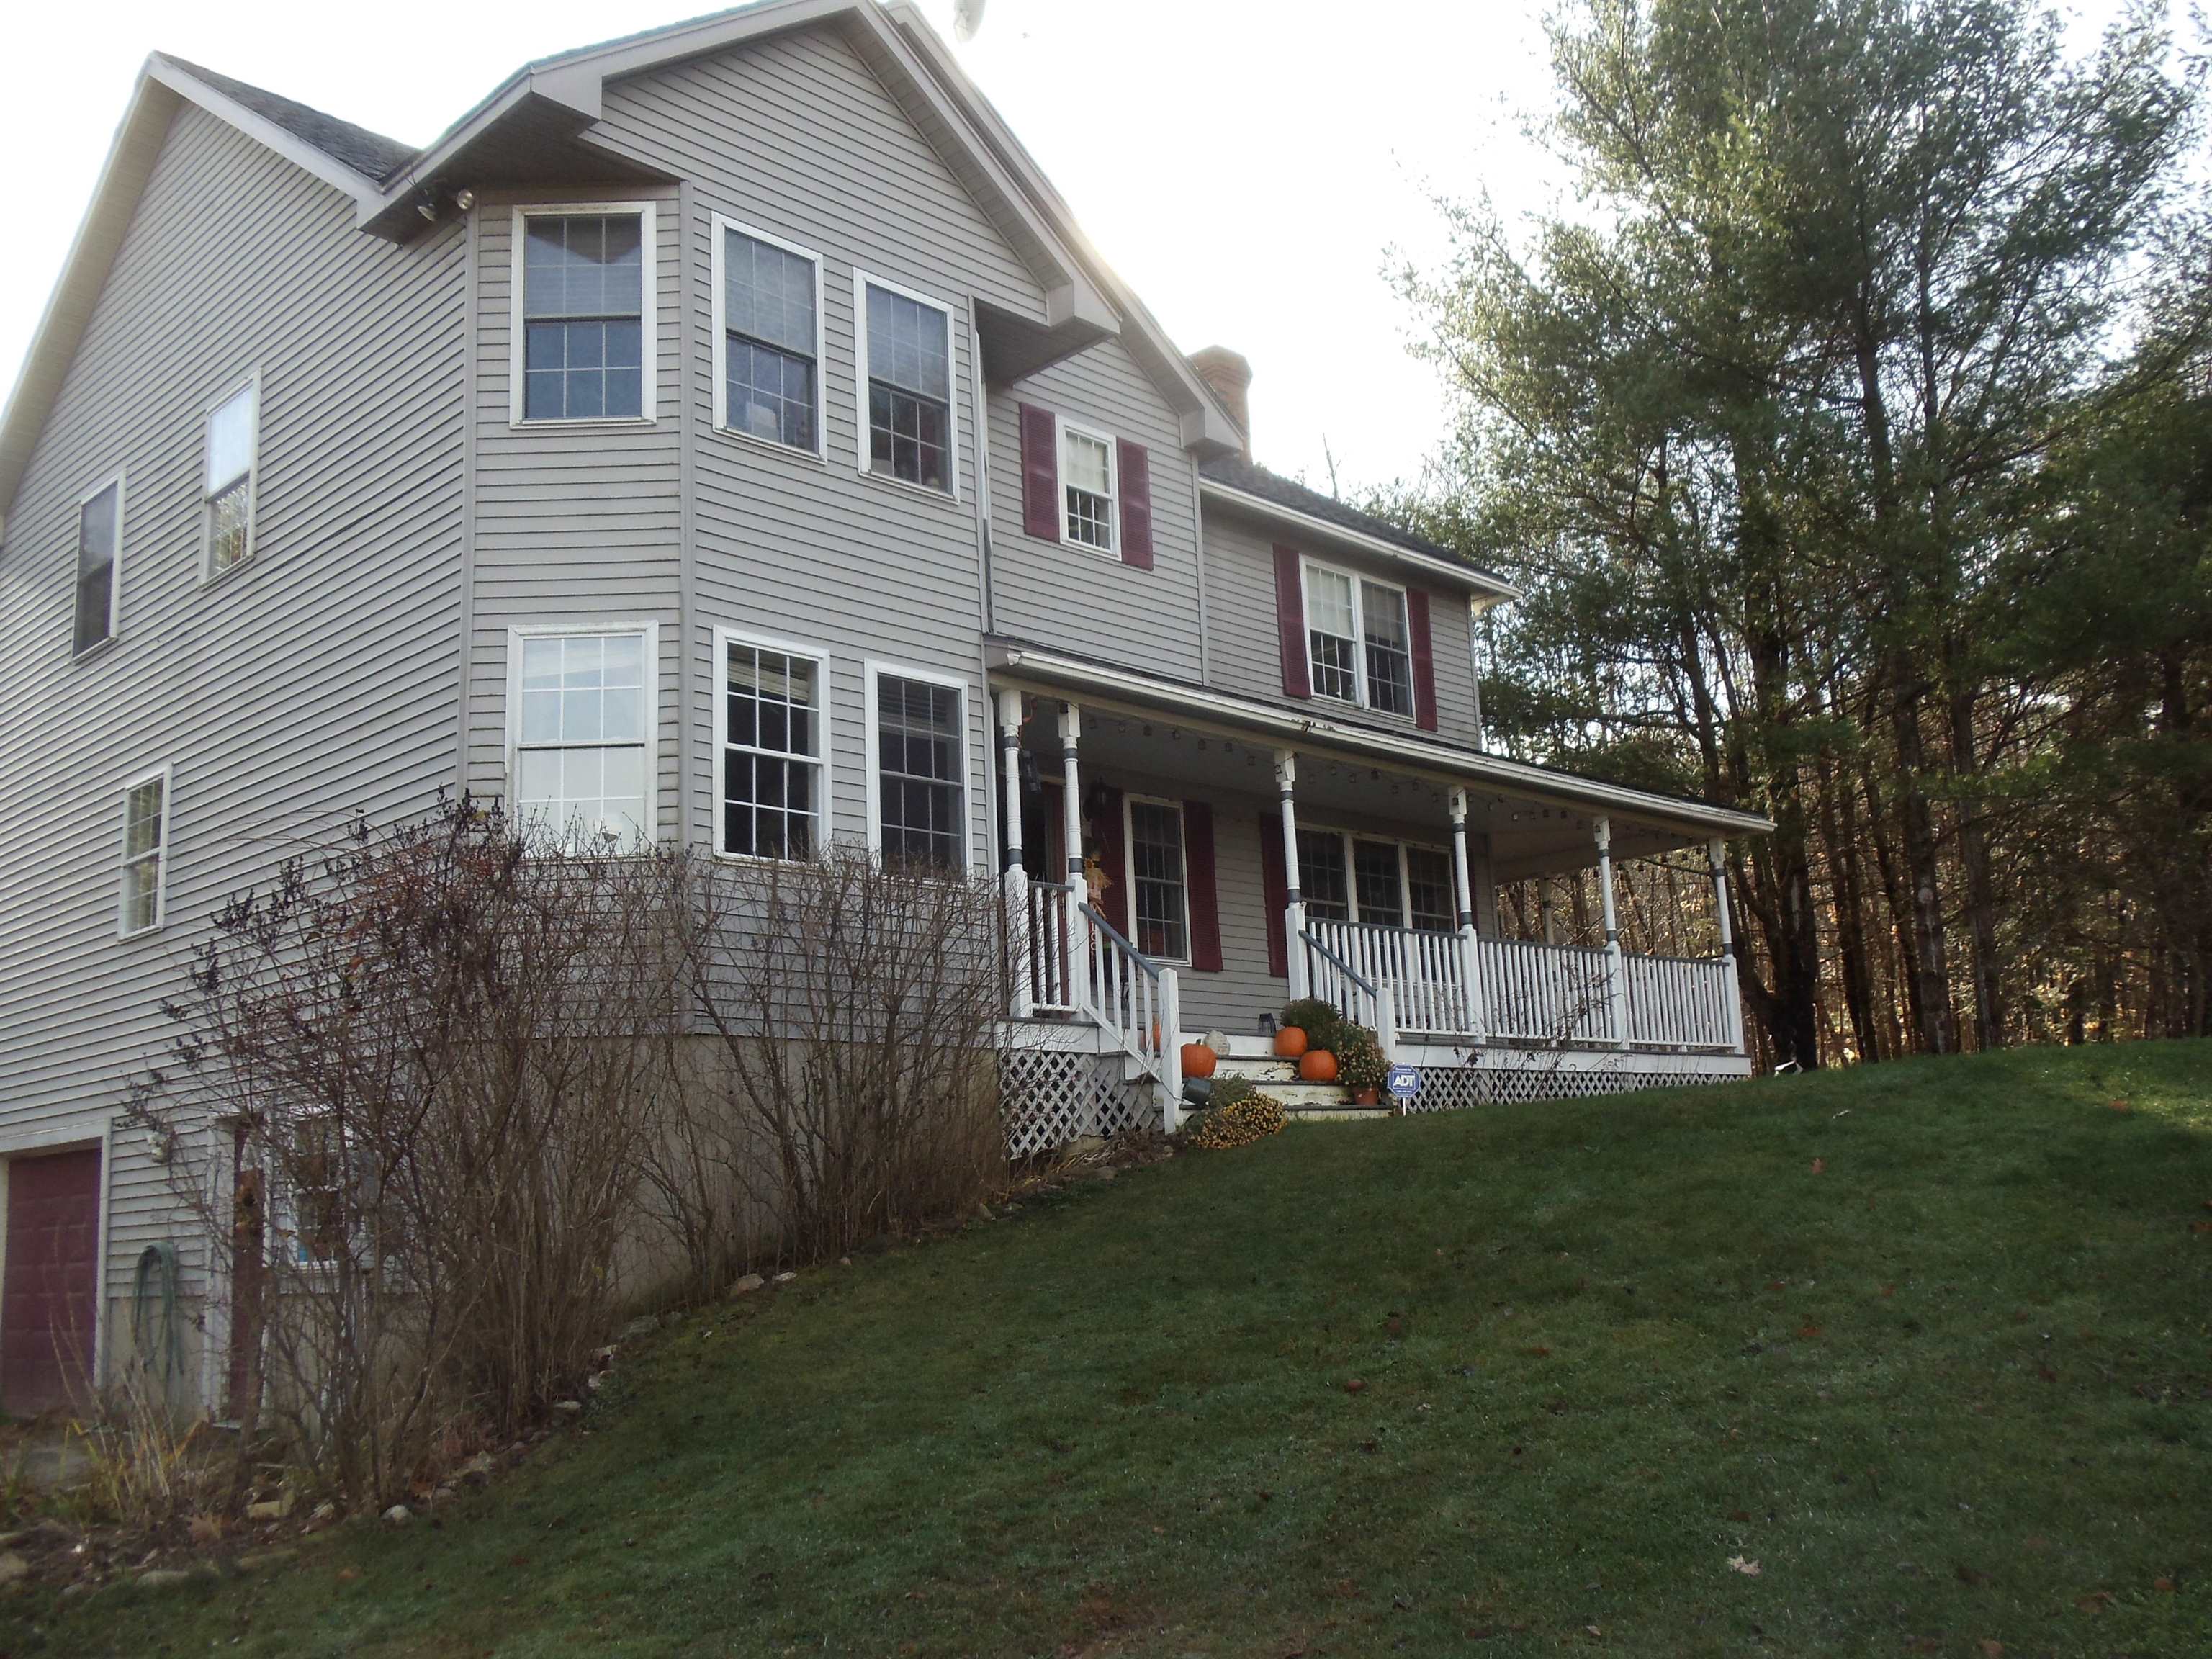 Photo of 273 Blakes Hill Road Northwood NH 03261-3936